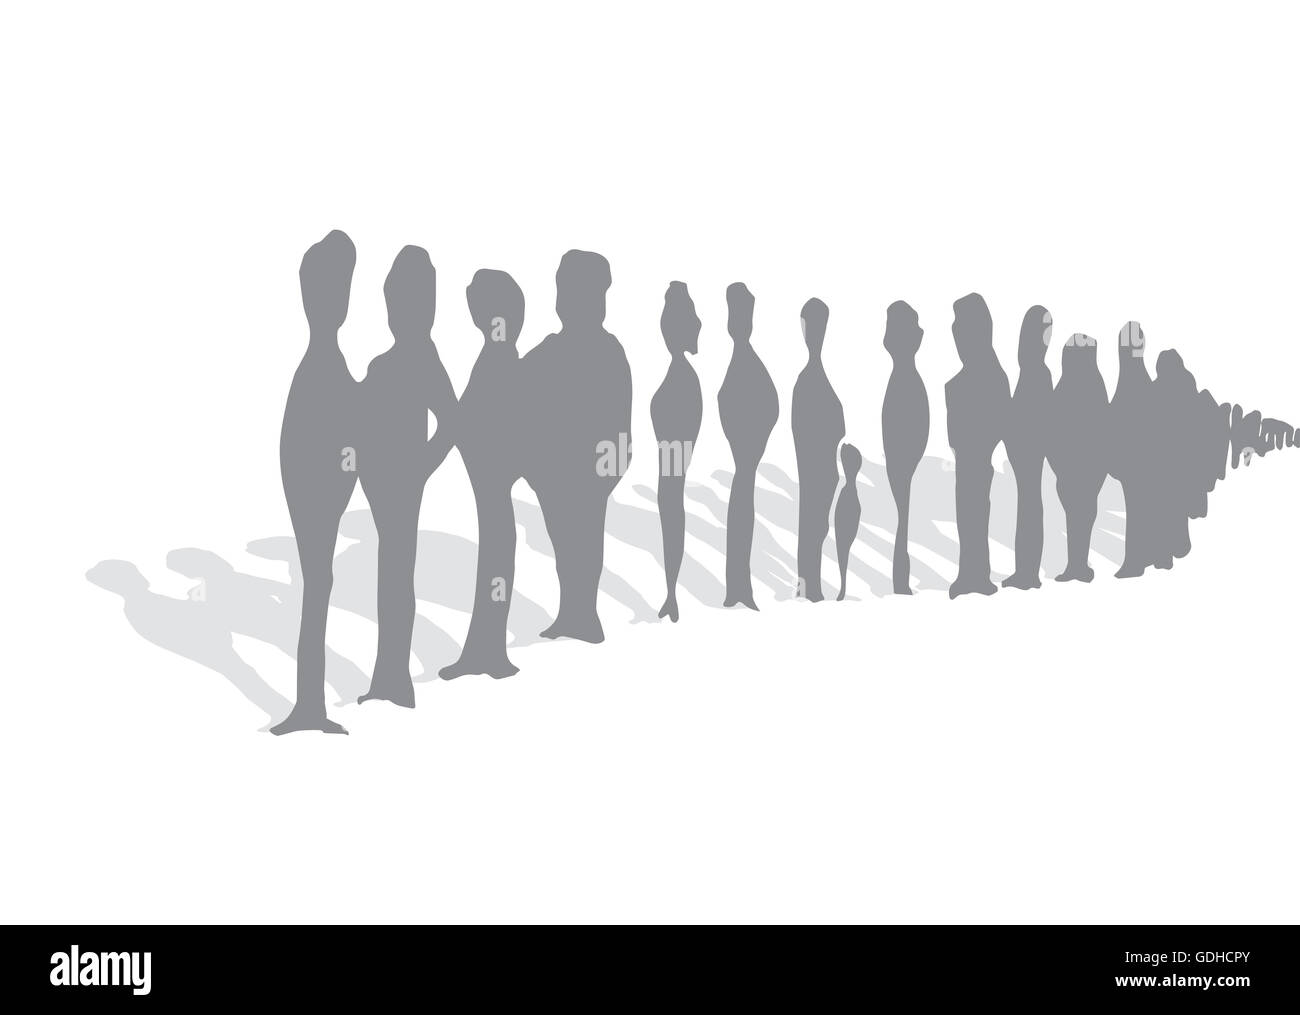 Cartoon illustration of endless queue of waiting unrecognizable people silhouettes Stock Photo